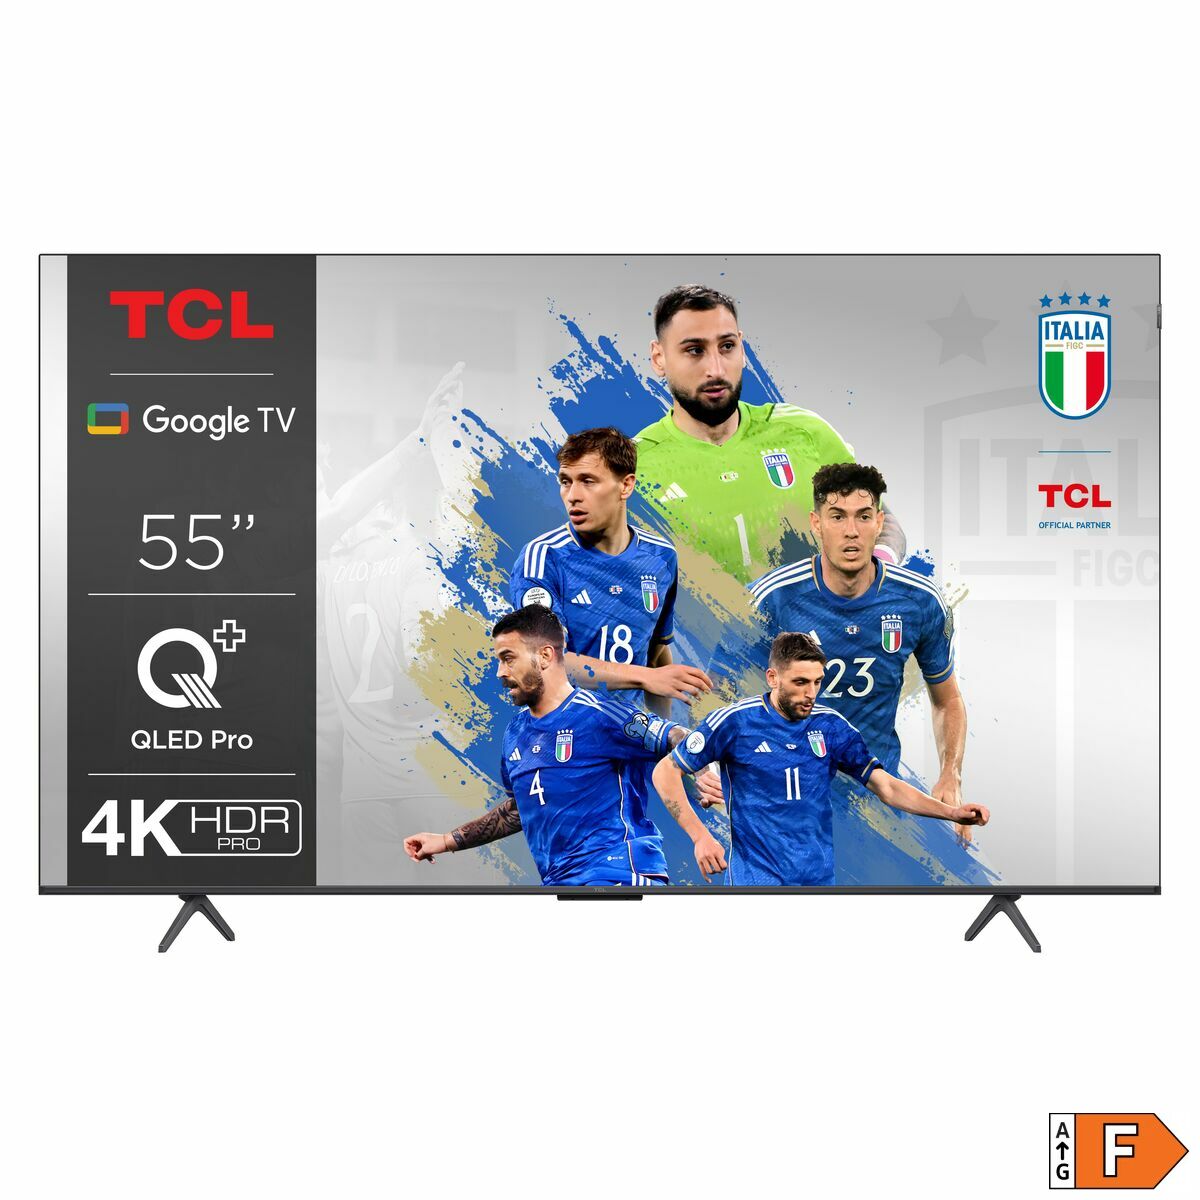 Smart TV TCL 55C655 4K Ultra HD 55" QLED, TCL, Electronics, TV, Video and home cinema, smart-tv-tcl-55c655-4k-ultra-hd-55-qled-1, Brand_TCL, category-reference-2609, category-reference-2625, category-reference-2931, category-reference-t-18805, category-reference-t-18827, category-reference-t-19653, cinema and television, Condition_NEW, entertainment, Price_500 - 600, UEFA Euro 2020, RiotNook